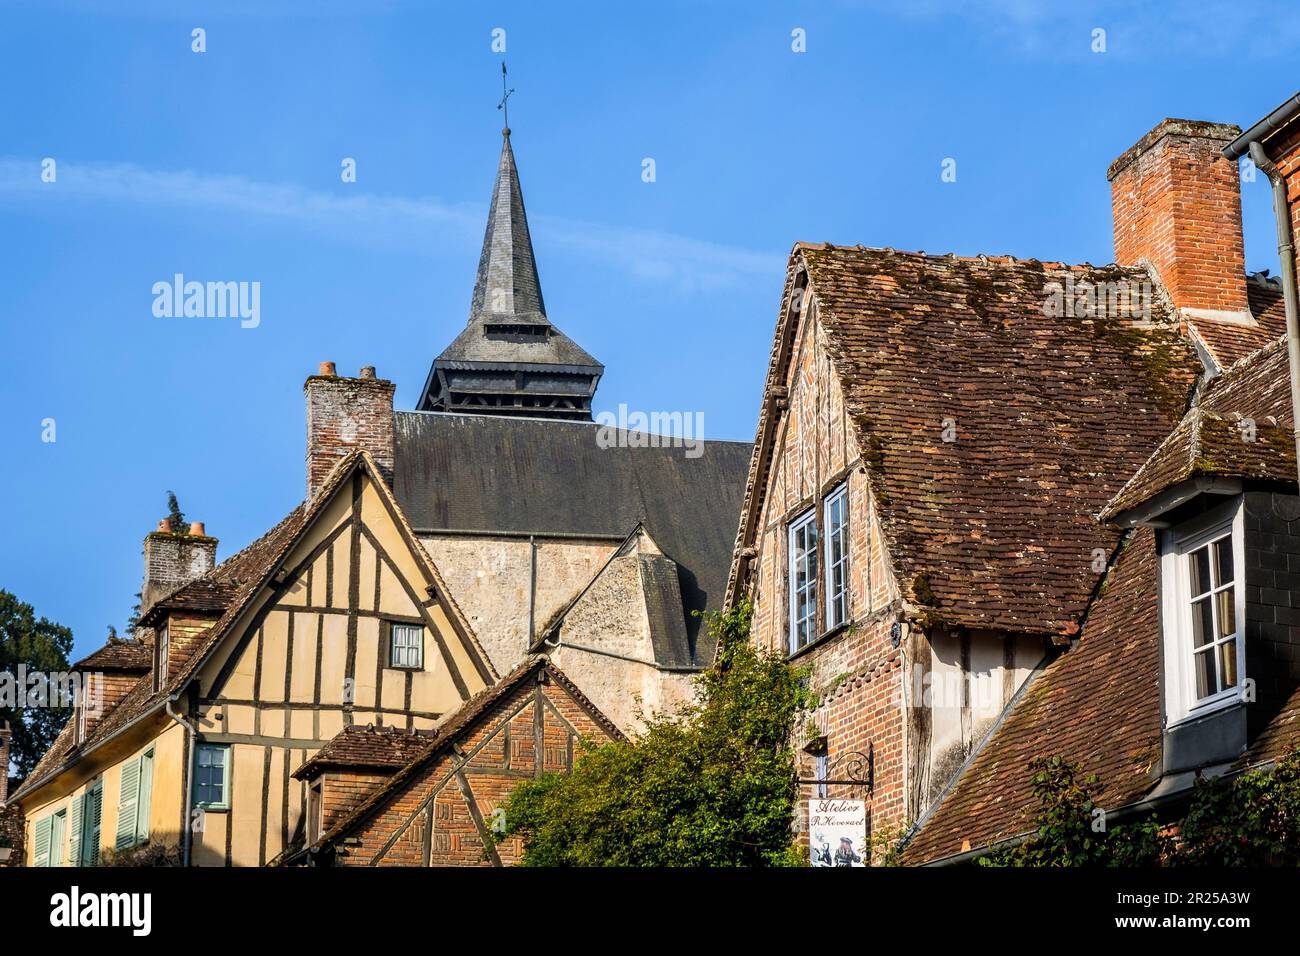 Gerberoy is ont of the most beautiful village of France - Man walking in the street | Gerberoy avec ses rues pavees typiques, ses toitures de tuiles r Stock Photo